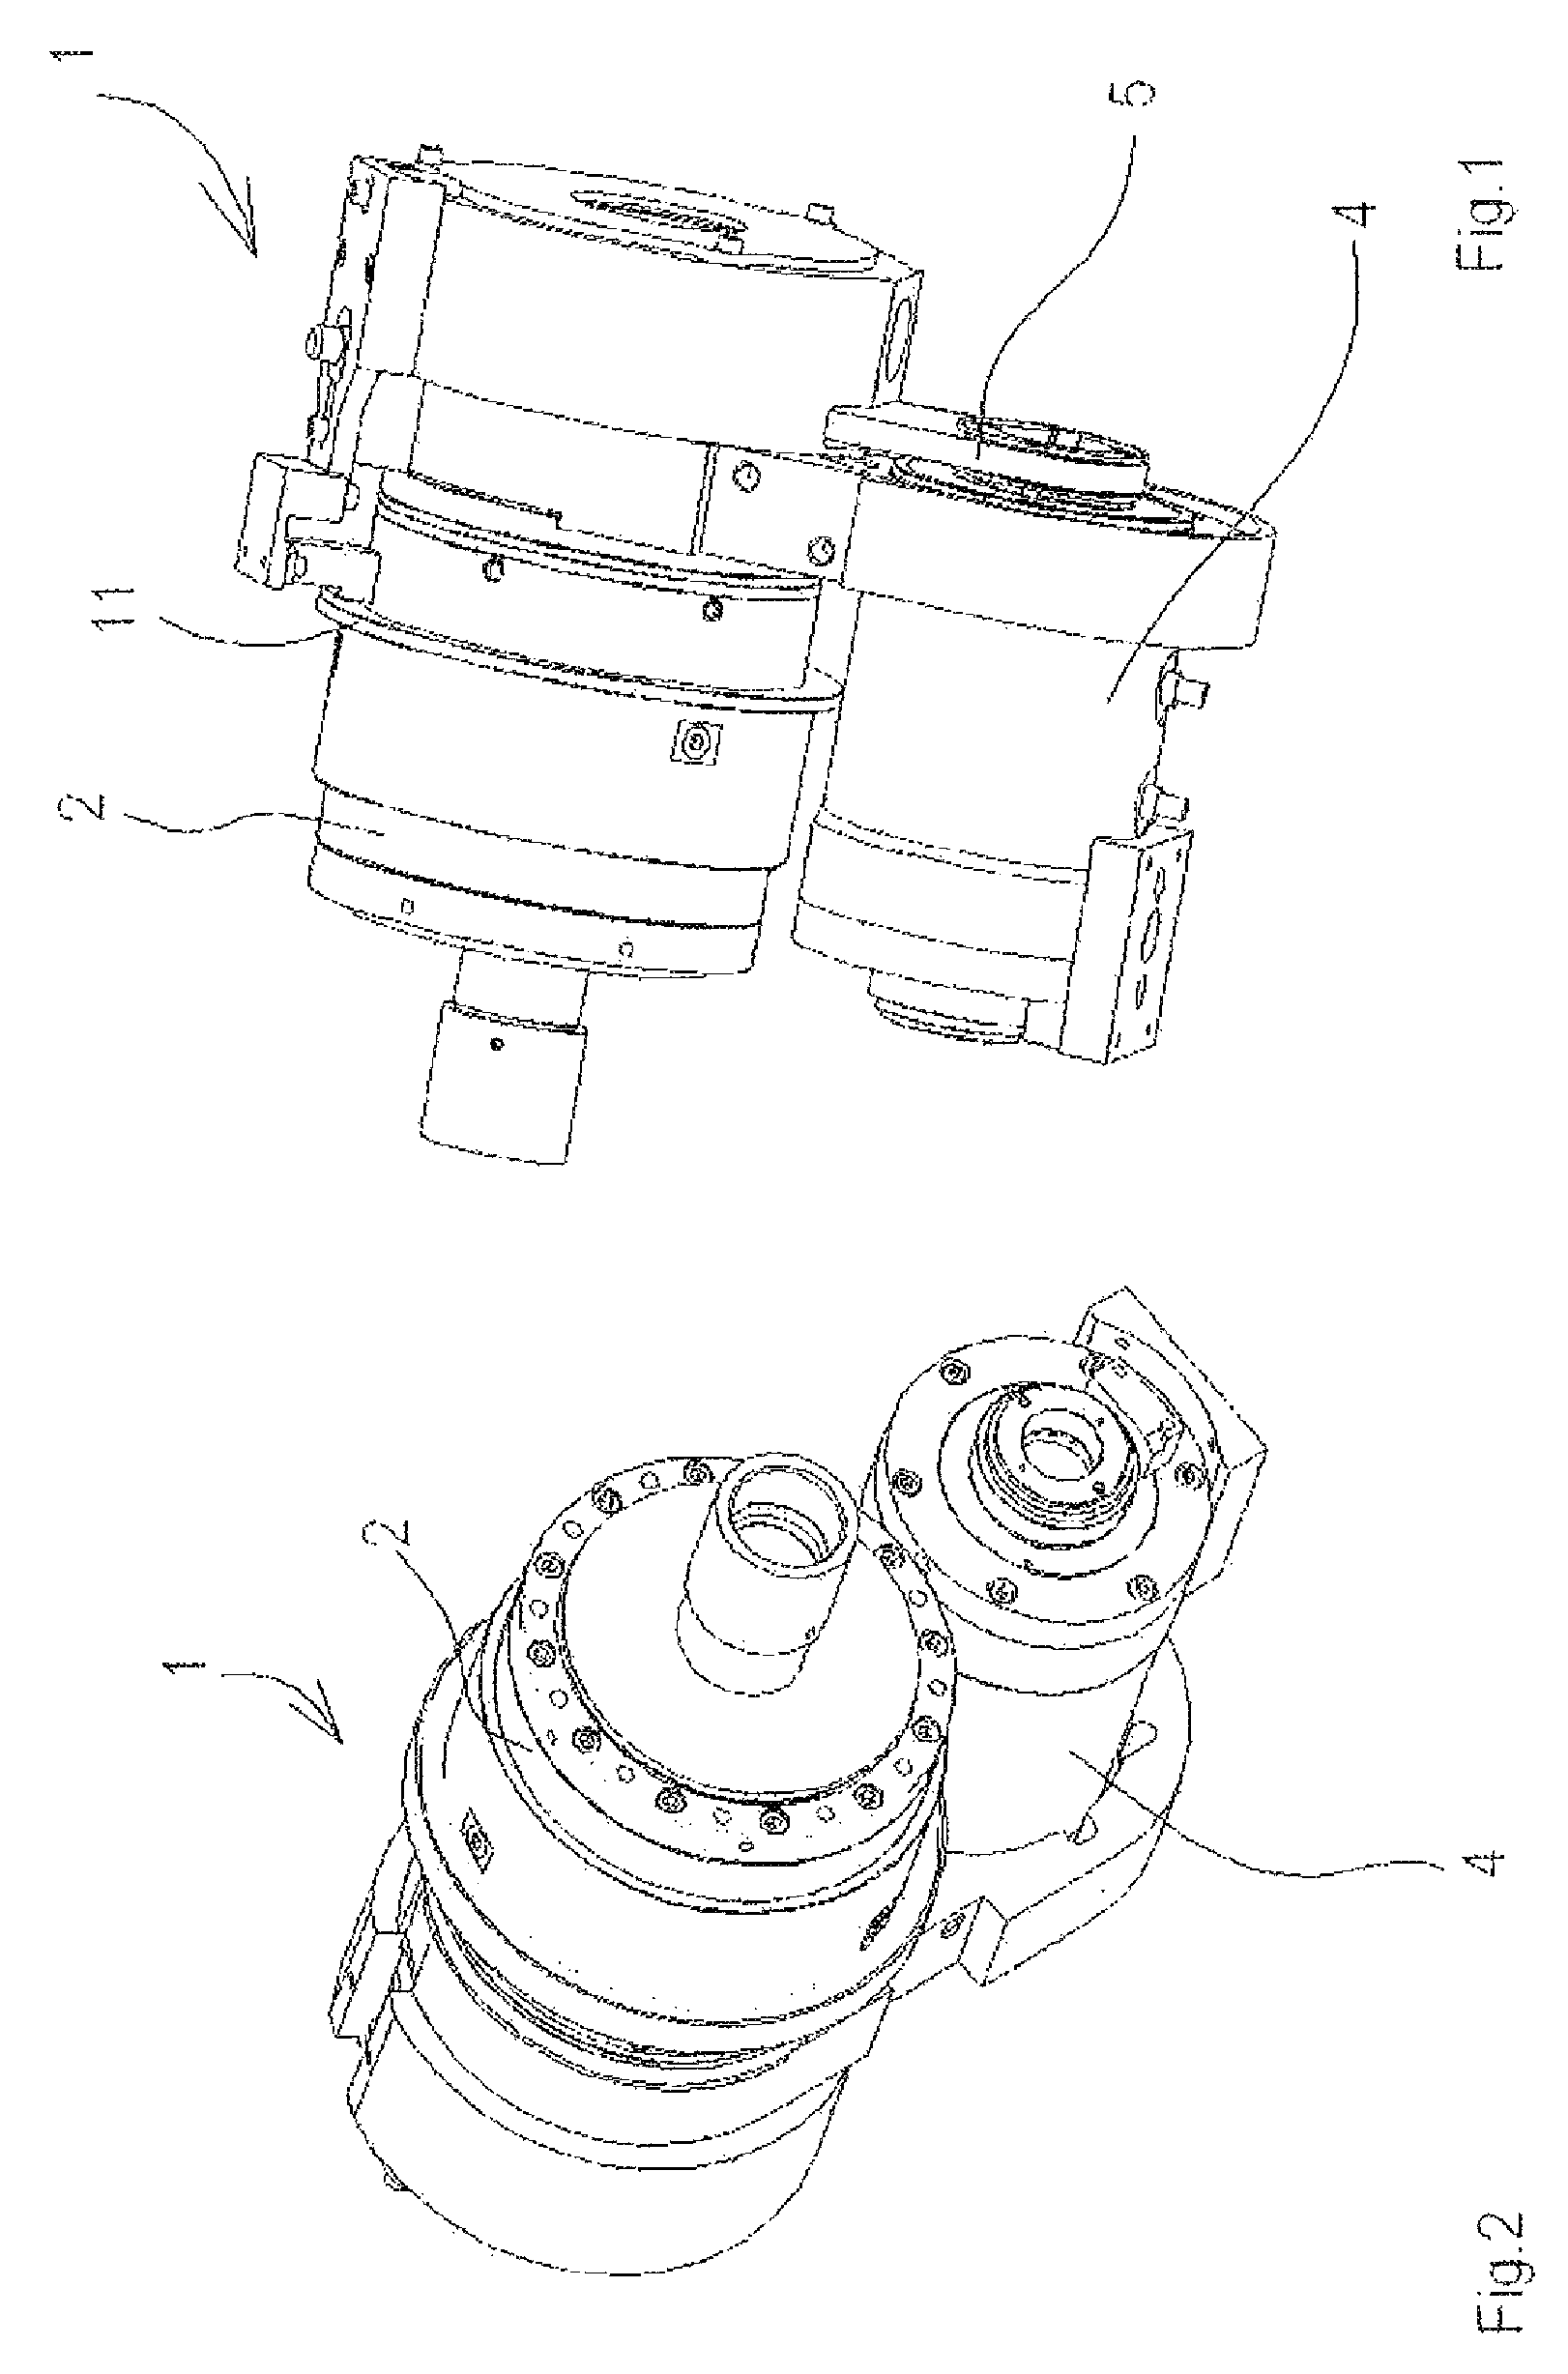 Method of chucking a tool or a workpiece and apparatus for carrying out the method